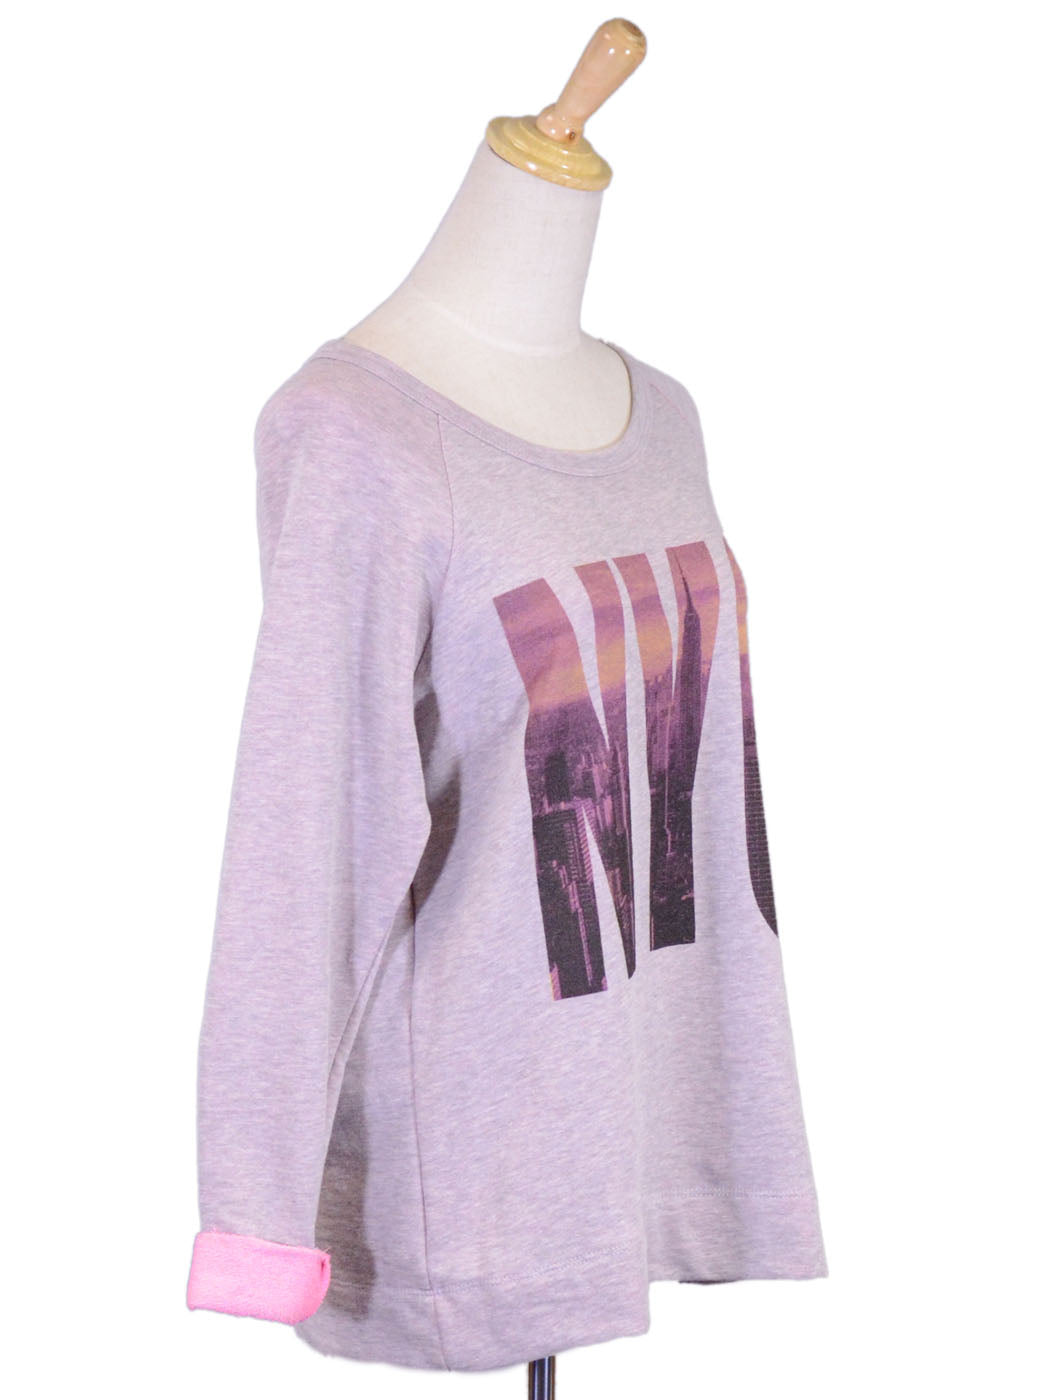 Basil And Lola NYC Three Quarter Sleeve Inside Out Two Tone Scoop Neck Sweater - ALILANG.COM